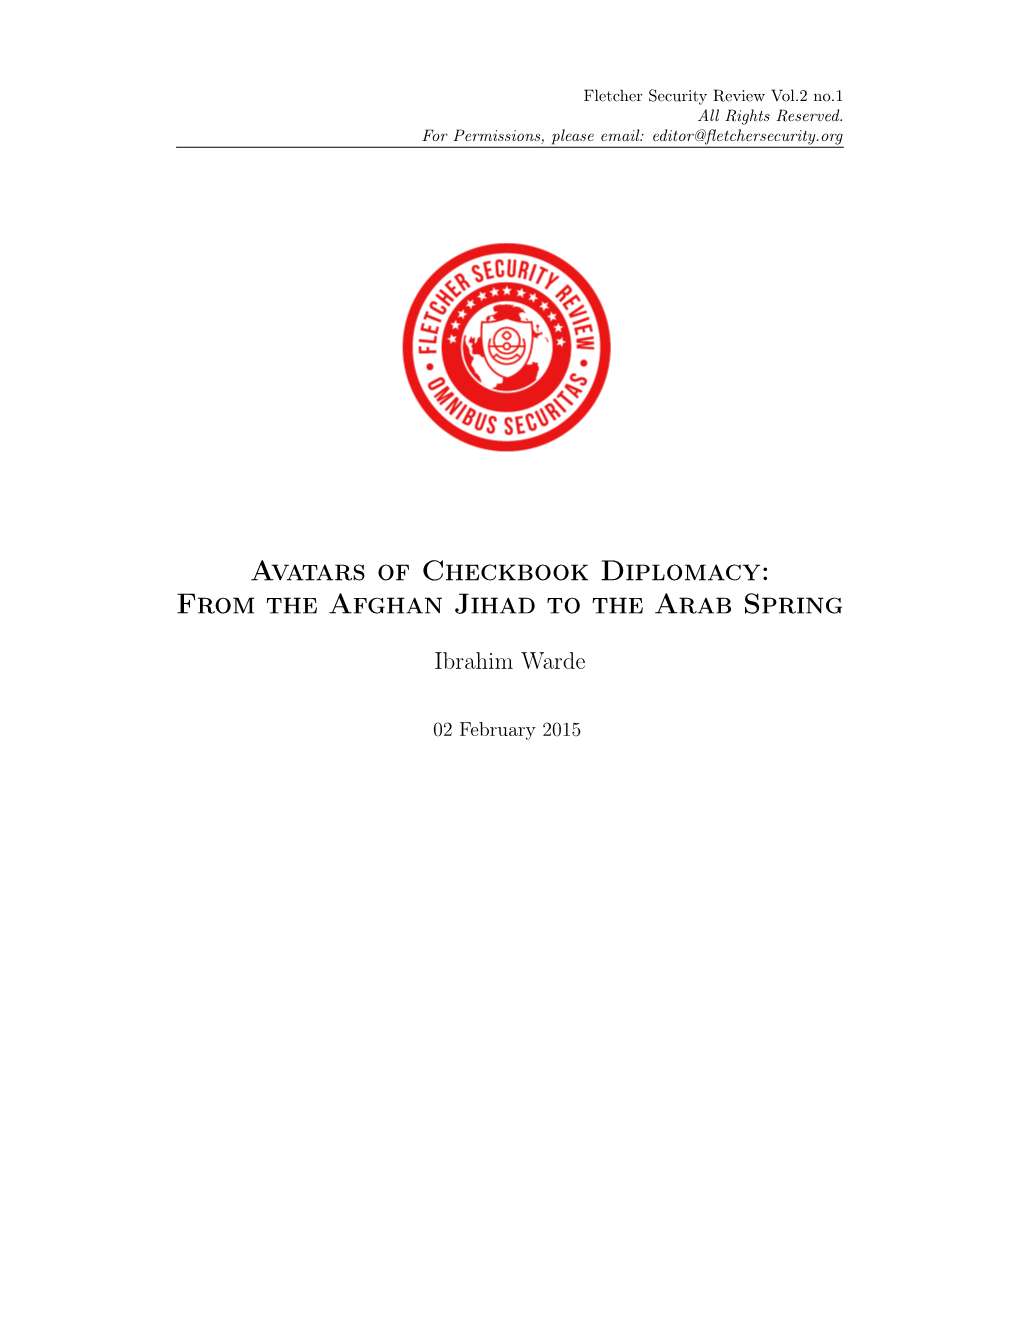 Avatars of Checkbook Diplomacy: from the Afghan Jihad to the Arab Spring